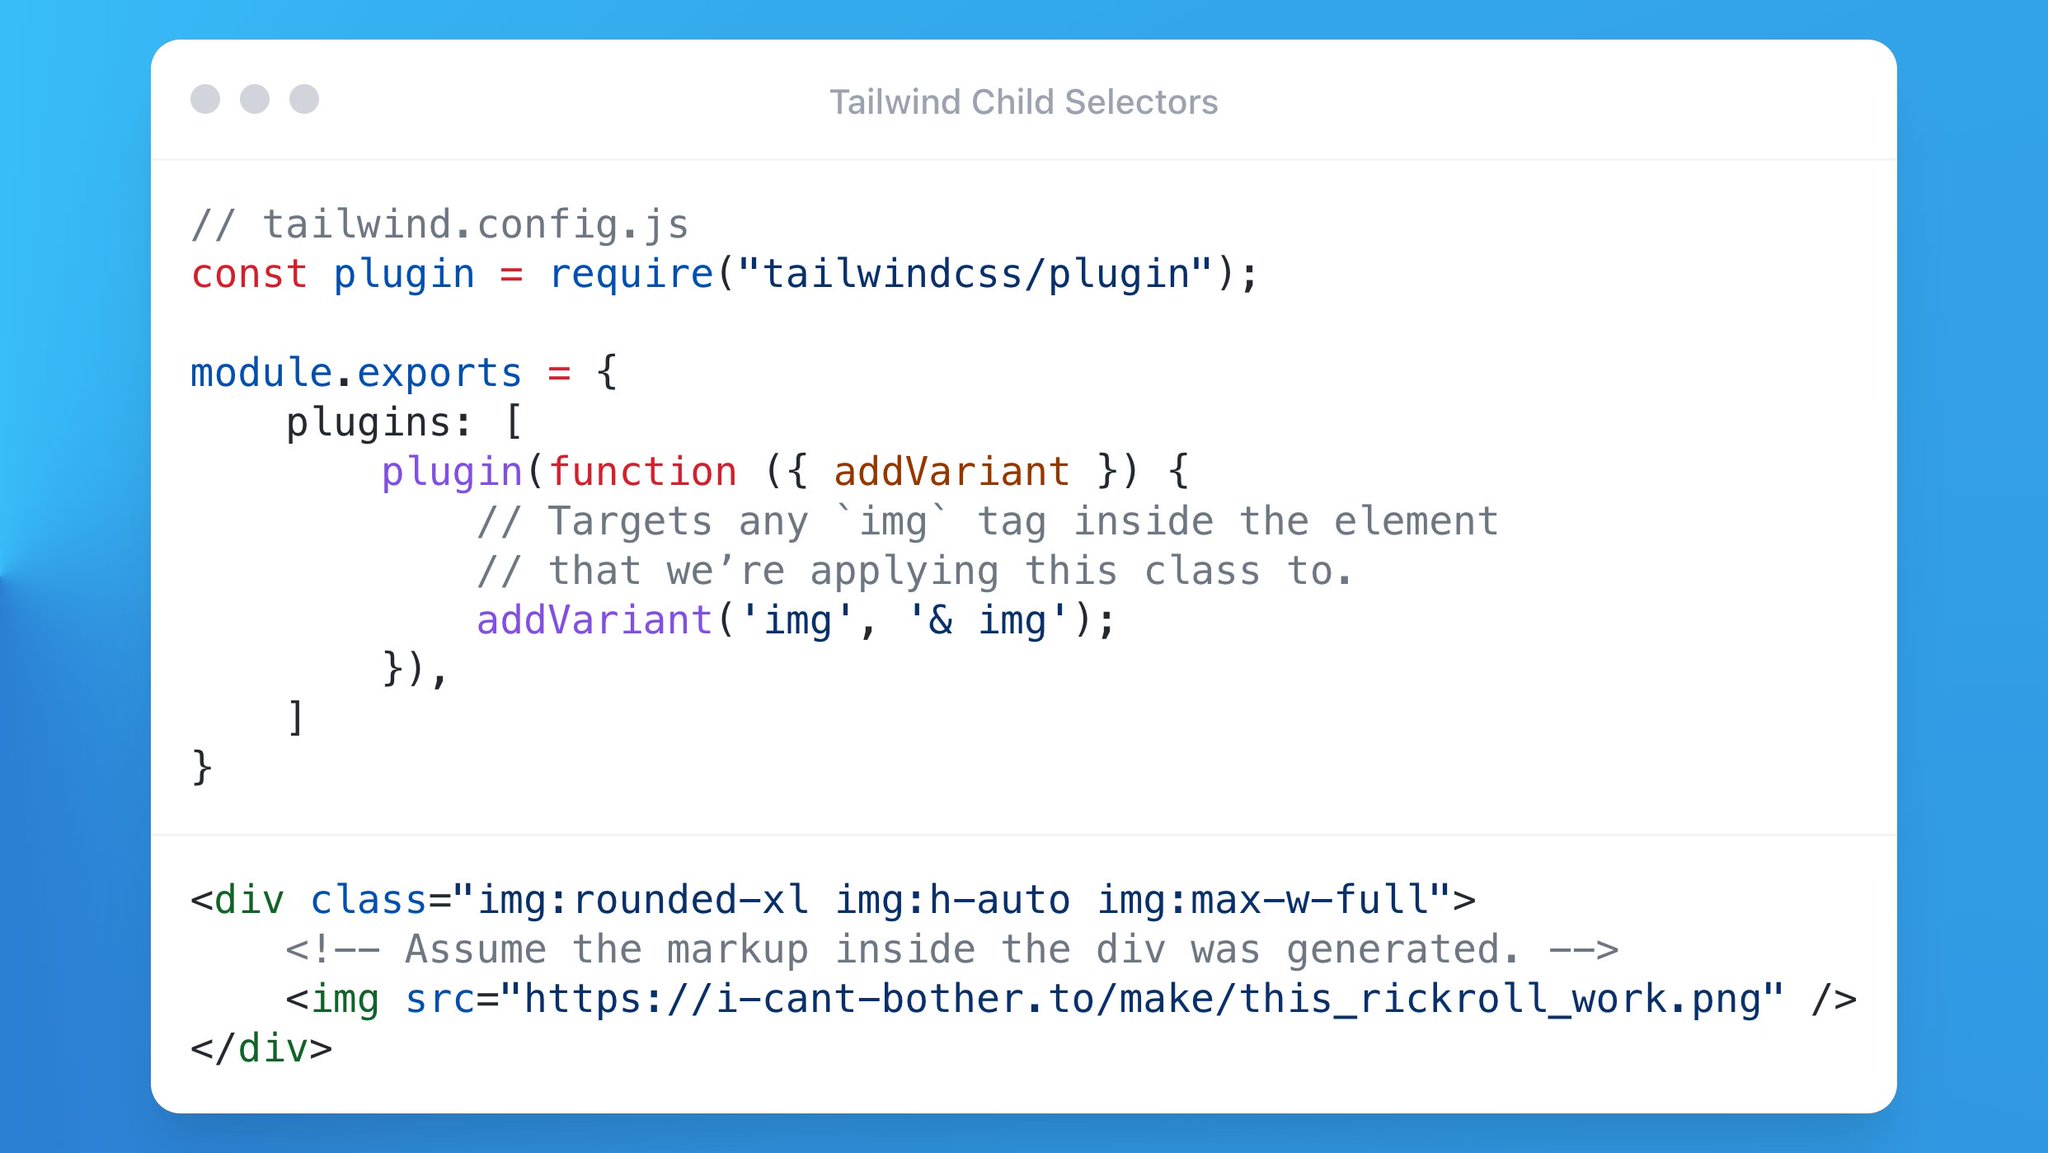 You can add this Tailwind plugin to generate child-selector variants